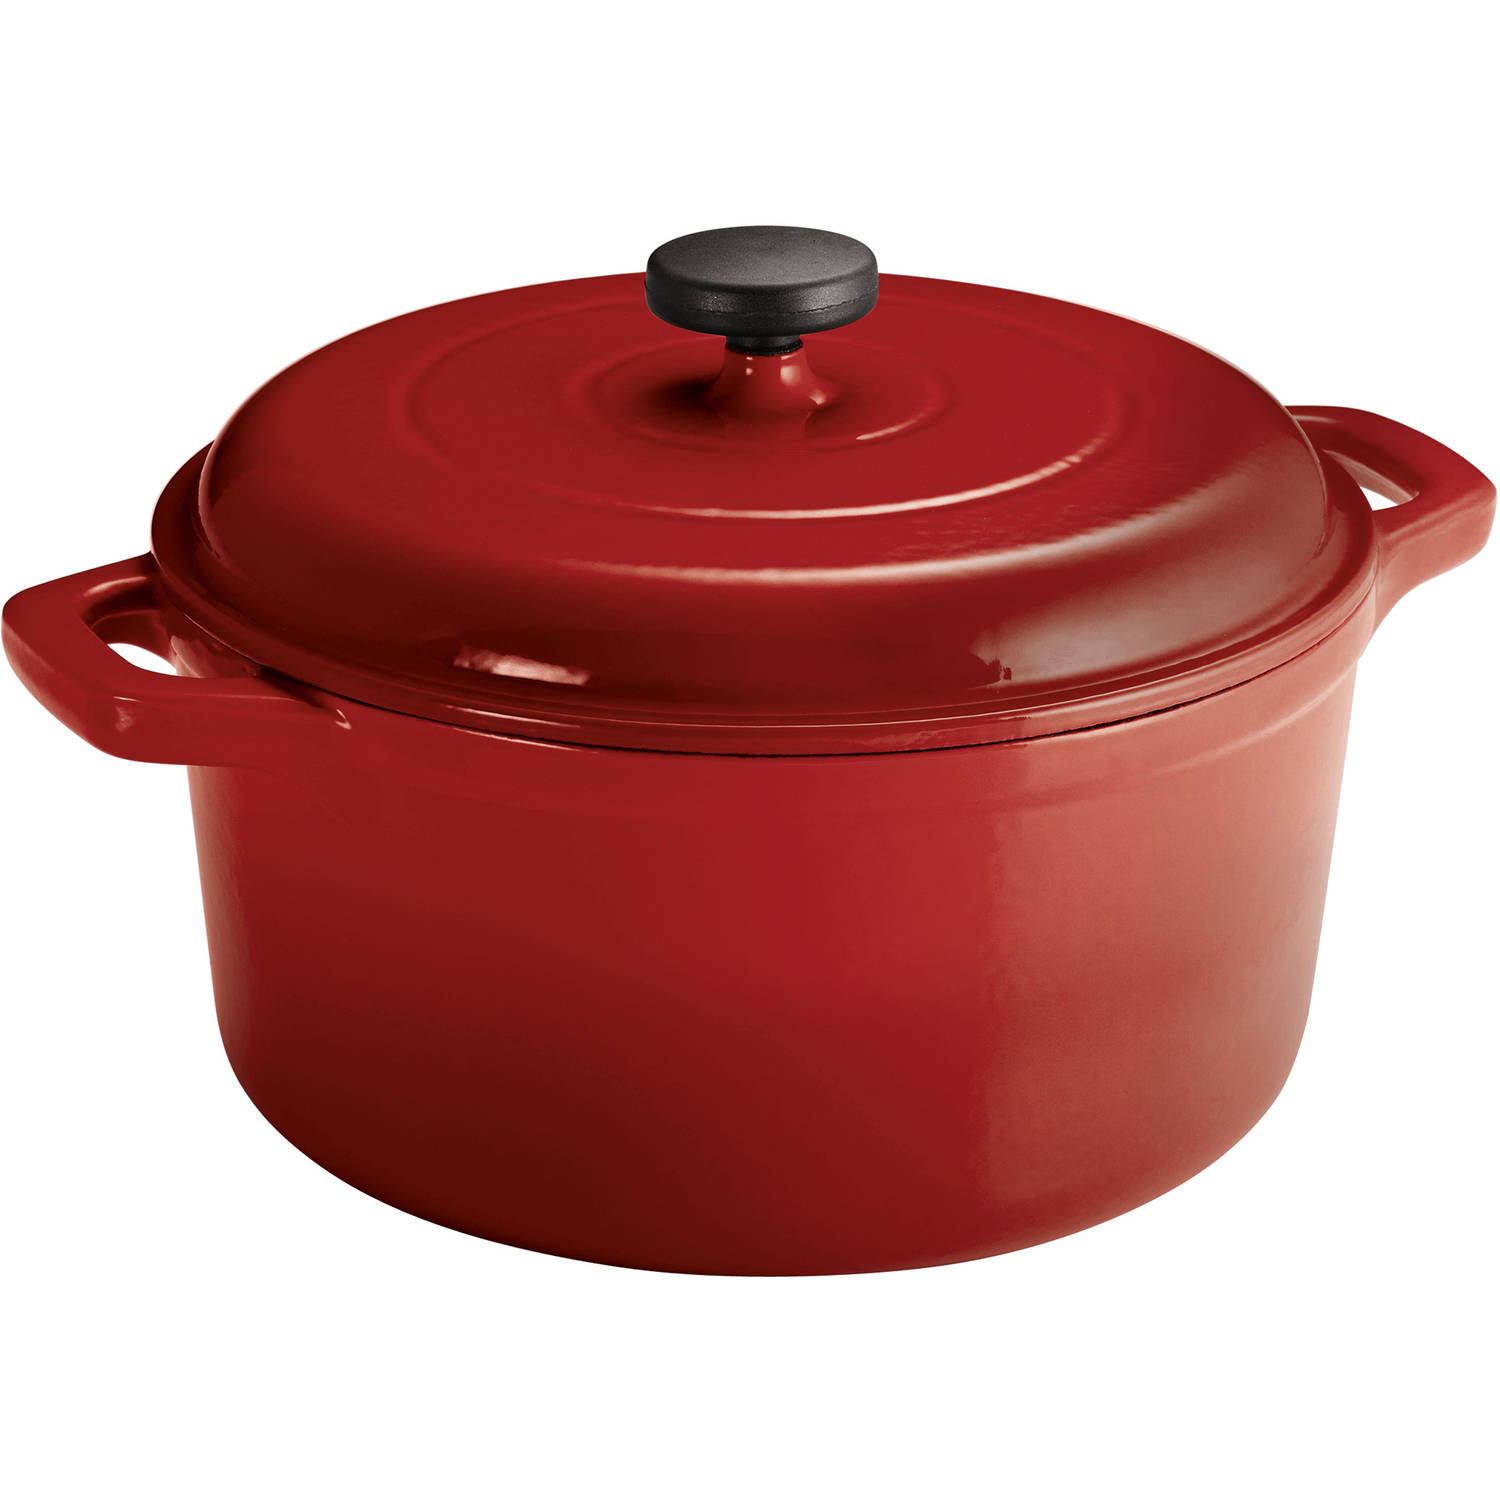 Tramontina Enameled Cast Iron 6.5 Quart Round Dutch Oven, Red - image 1 of 7